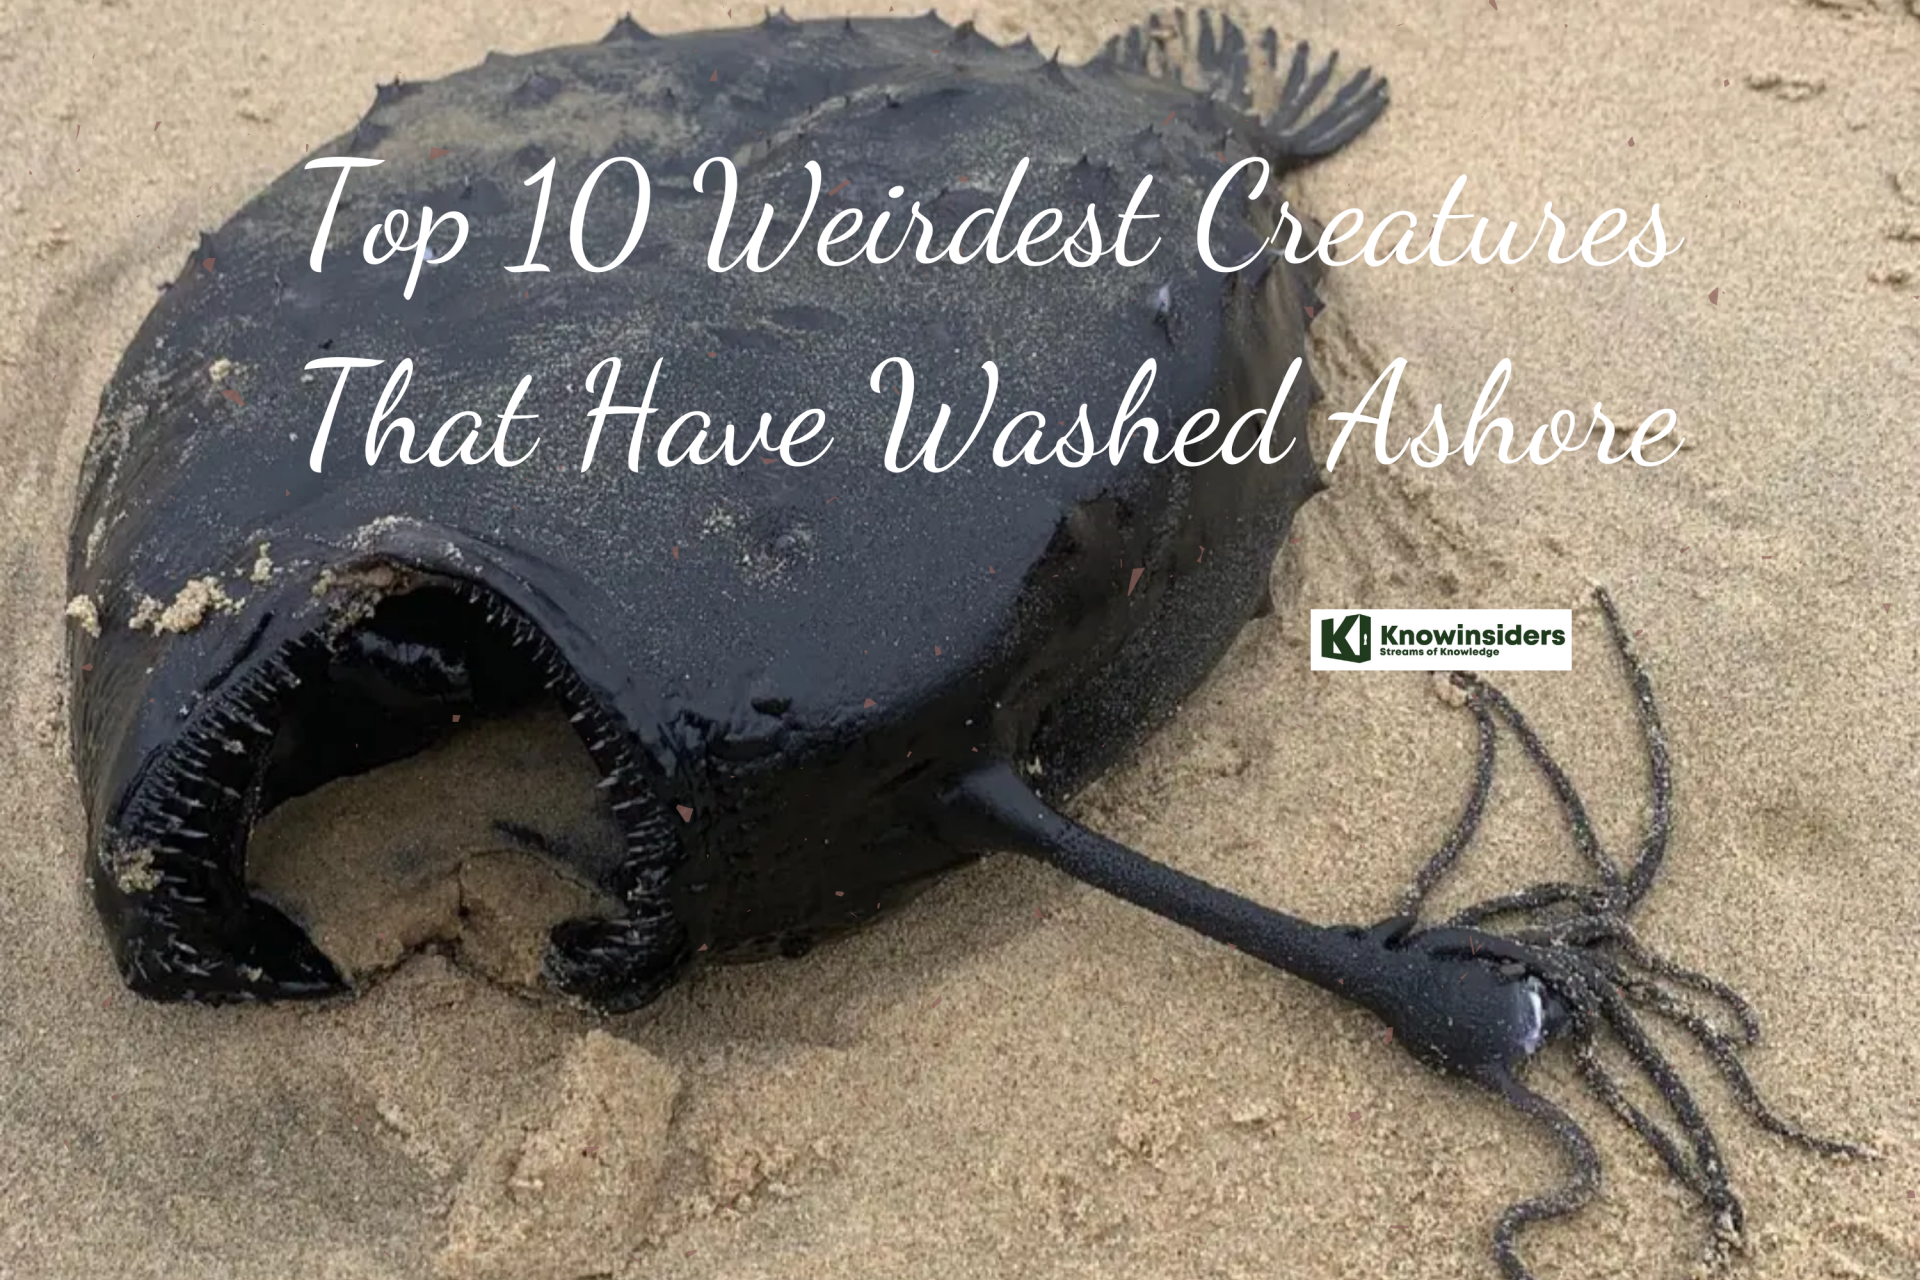 Top 10 Weirdest Creatures That Have Washed Ashore